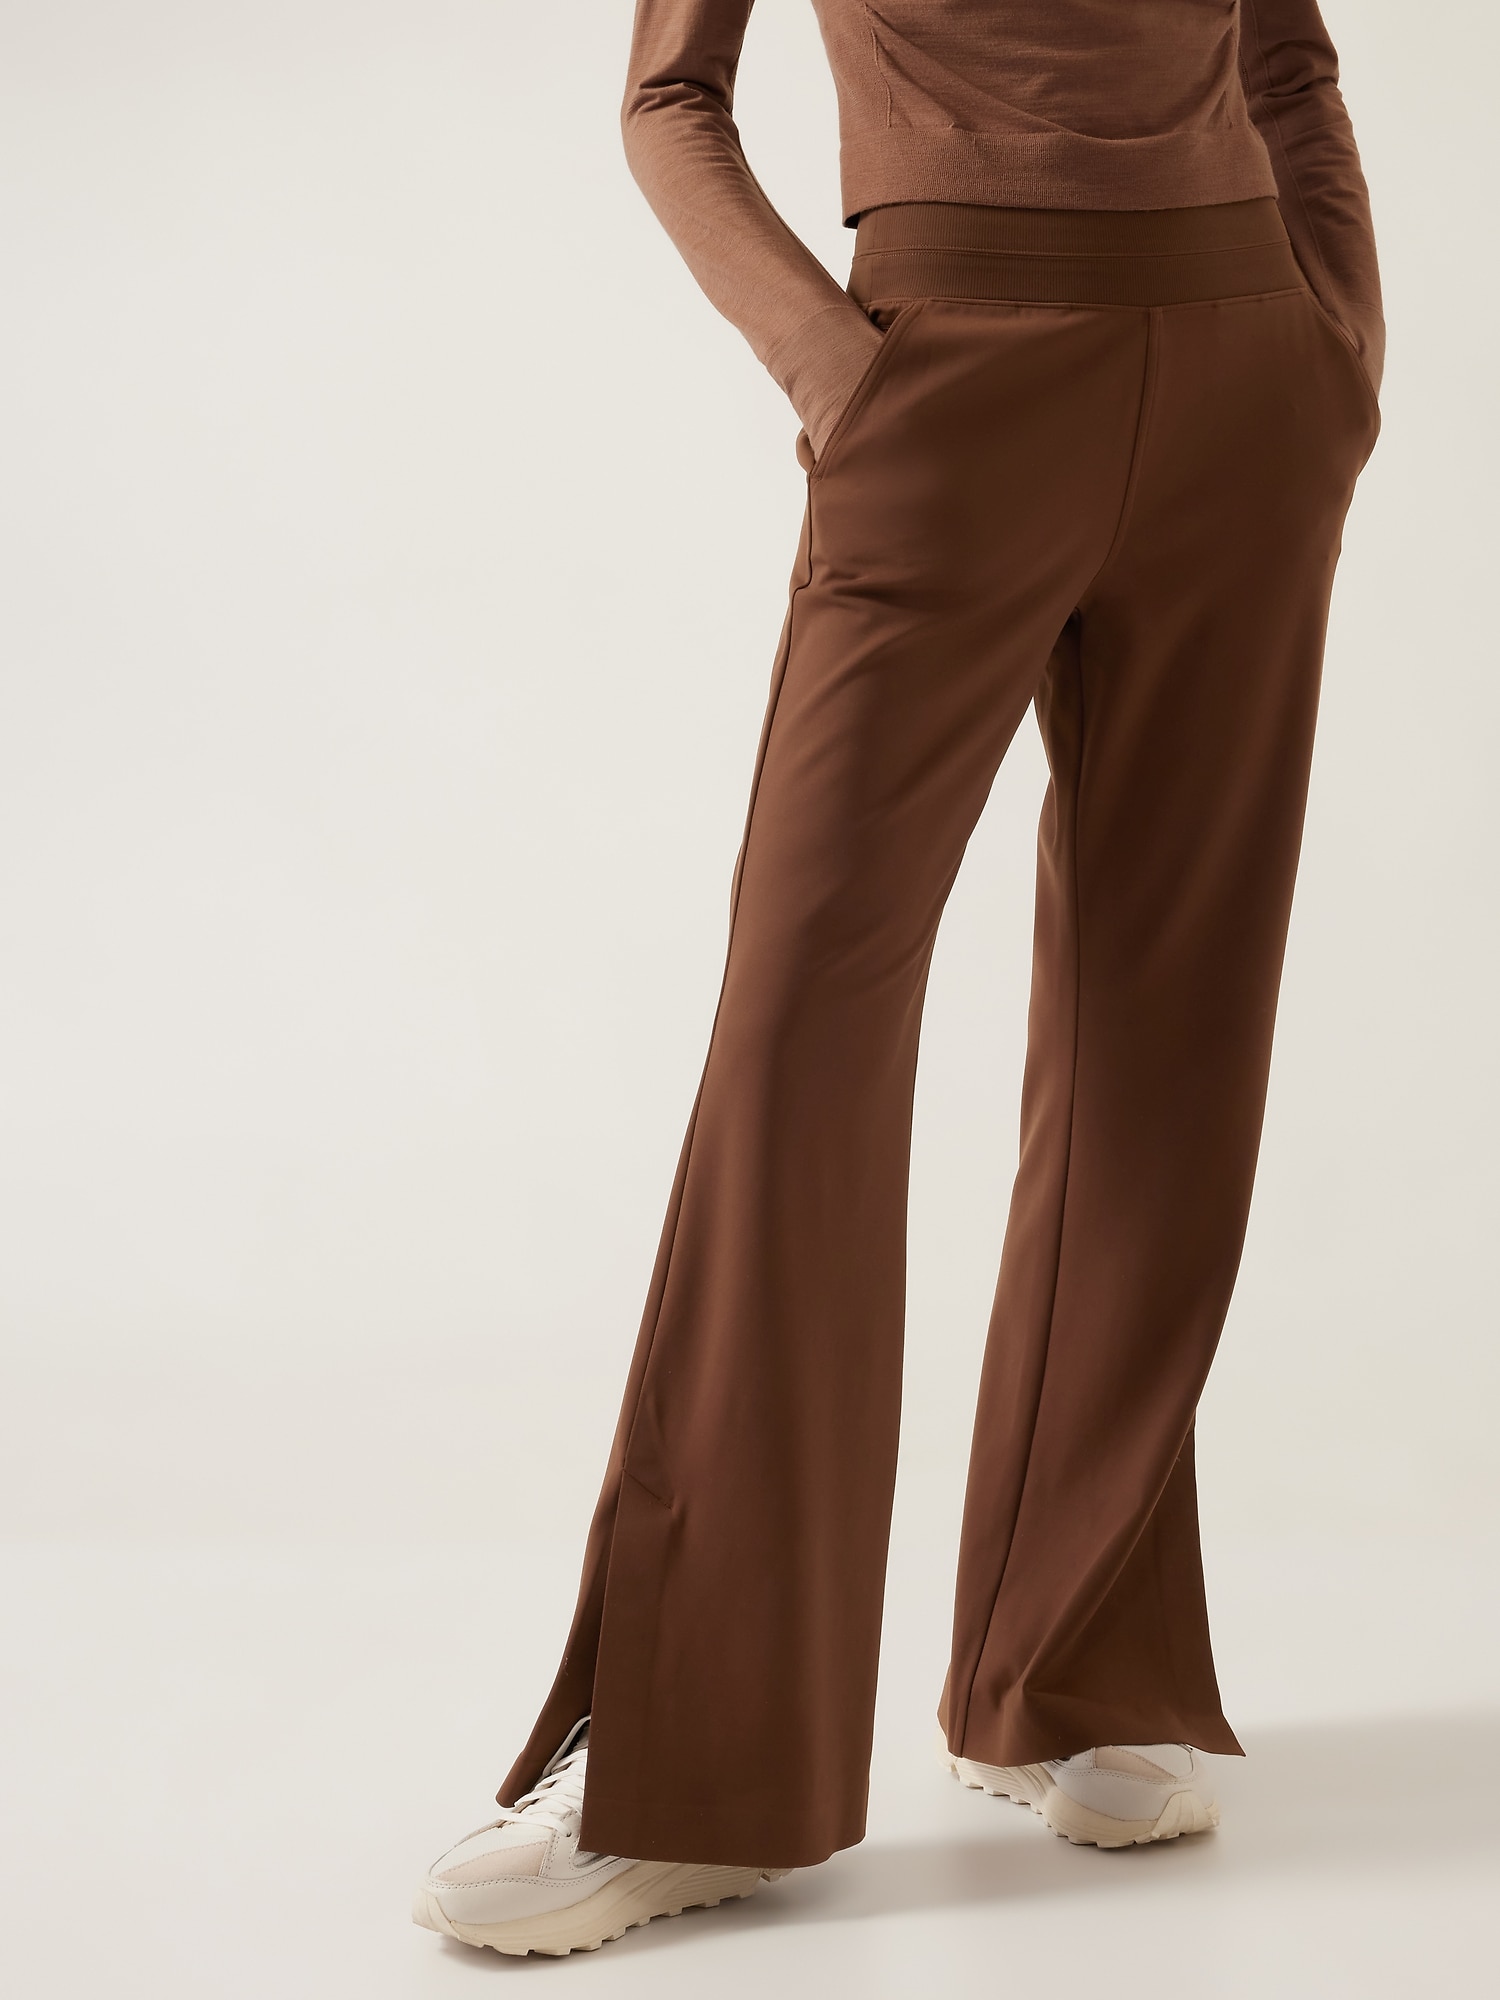 Athleta Venice Flare Pant - clothing & accessories - by owner - apparel  sale - craigslist